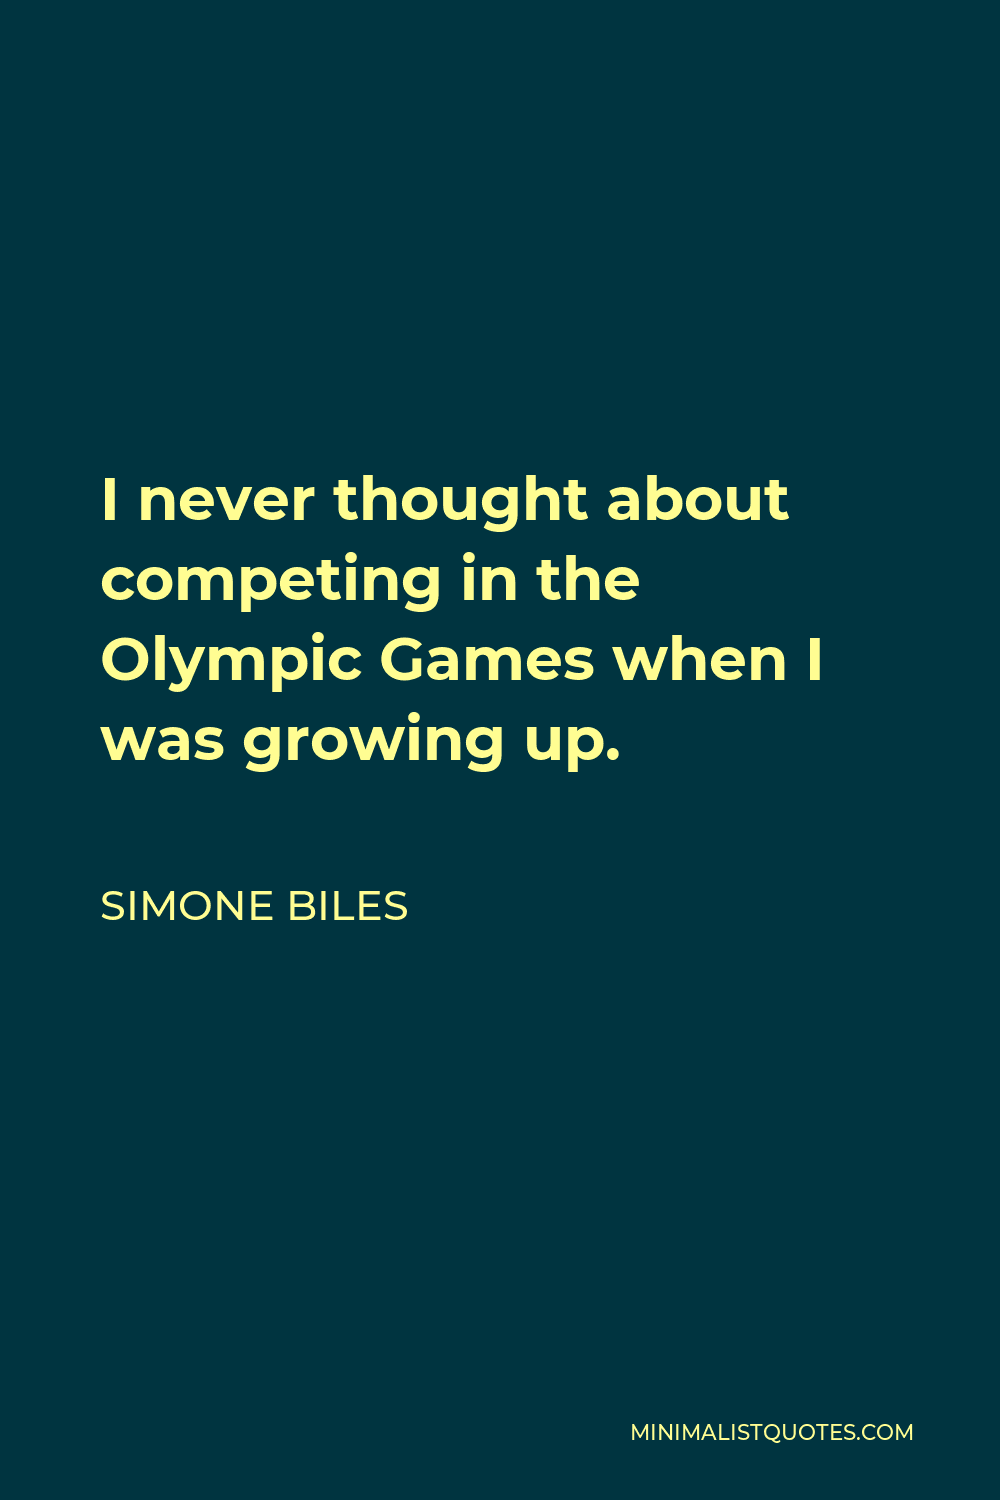 Simone Biles Quote - I never thought about competing in the Olympic Games when I was growing up.